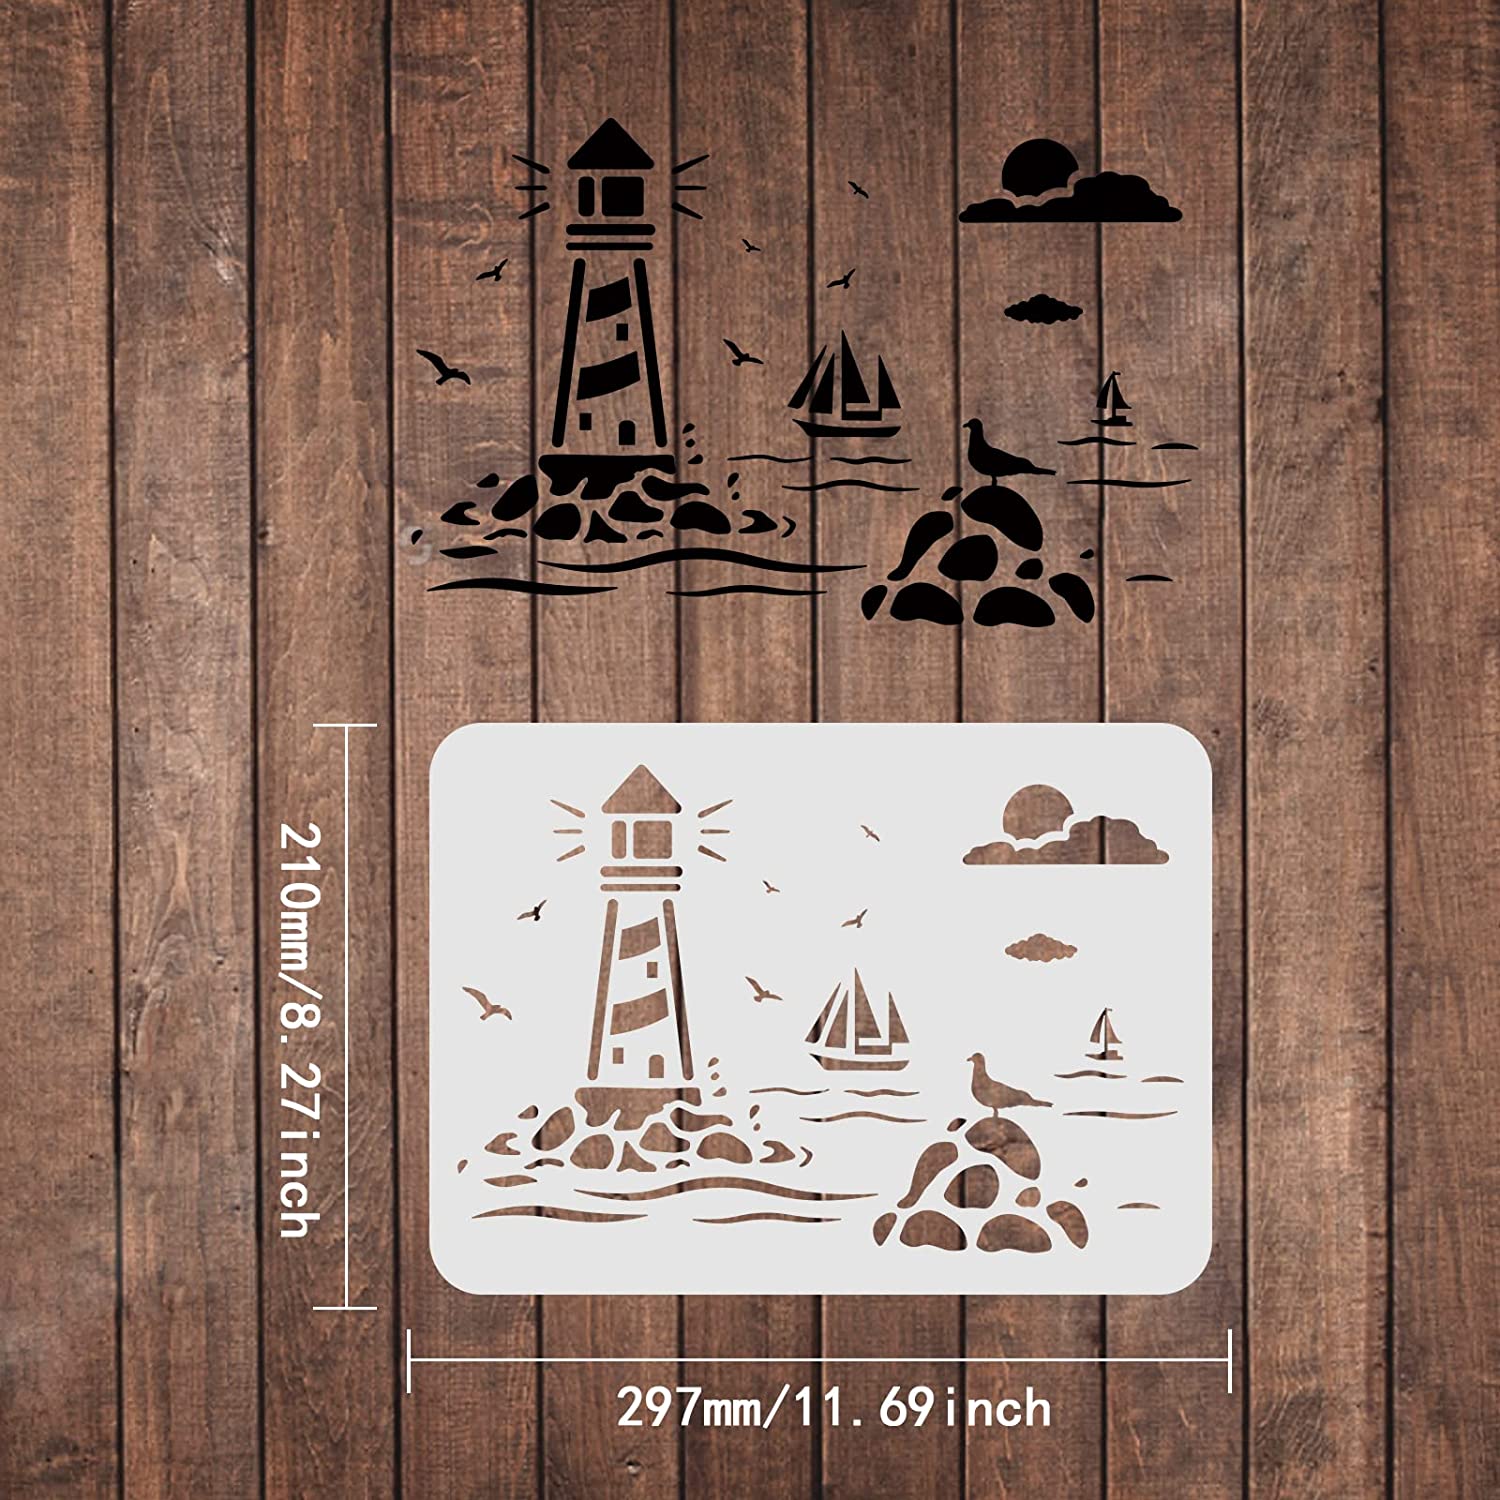 Ocean Lighthouse Painting Stencil in Large Sizes, 11.6x8.3 inch Plastic Stencils Decoration Reusable Stencils for DIY Gifts DIY Shirts DIY Handmade Wall Painting